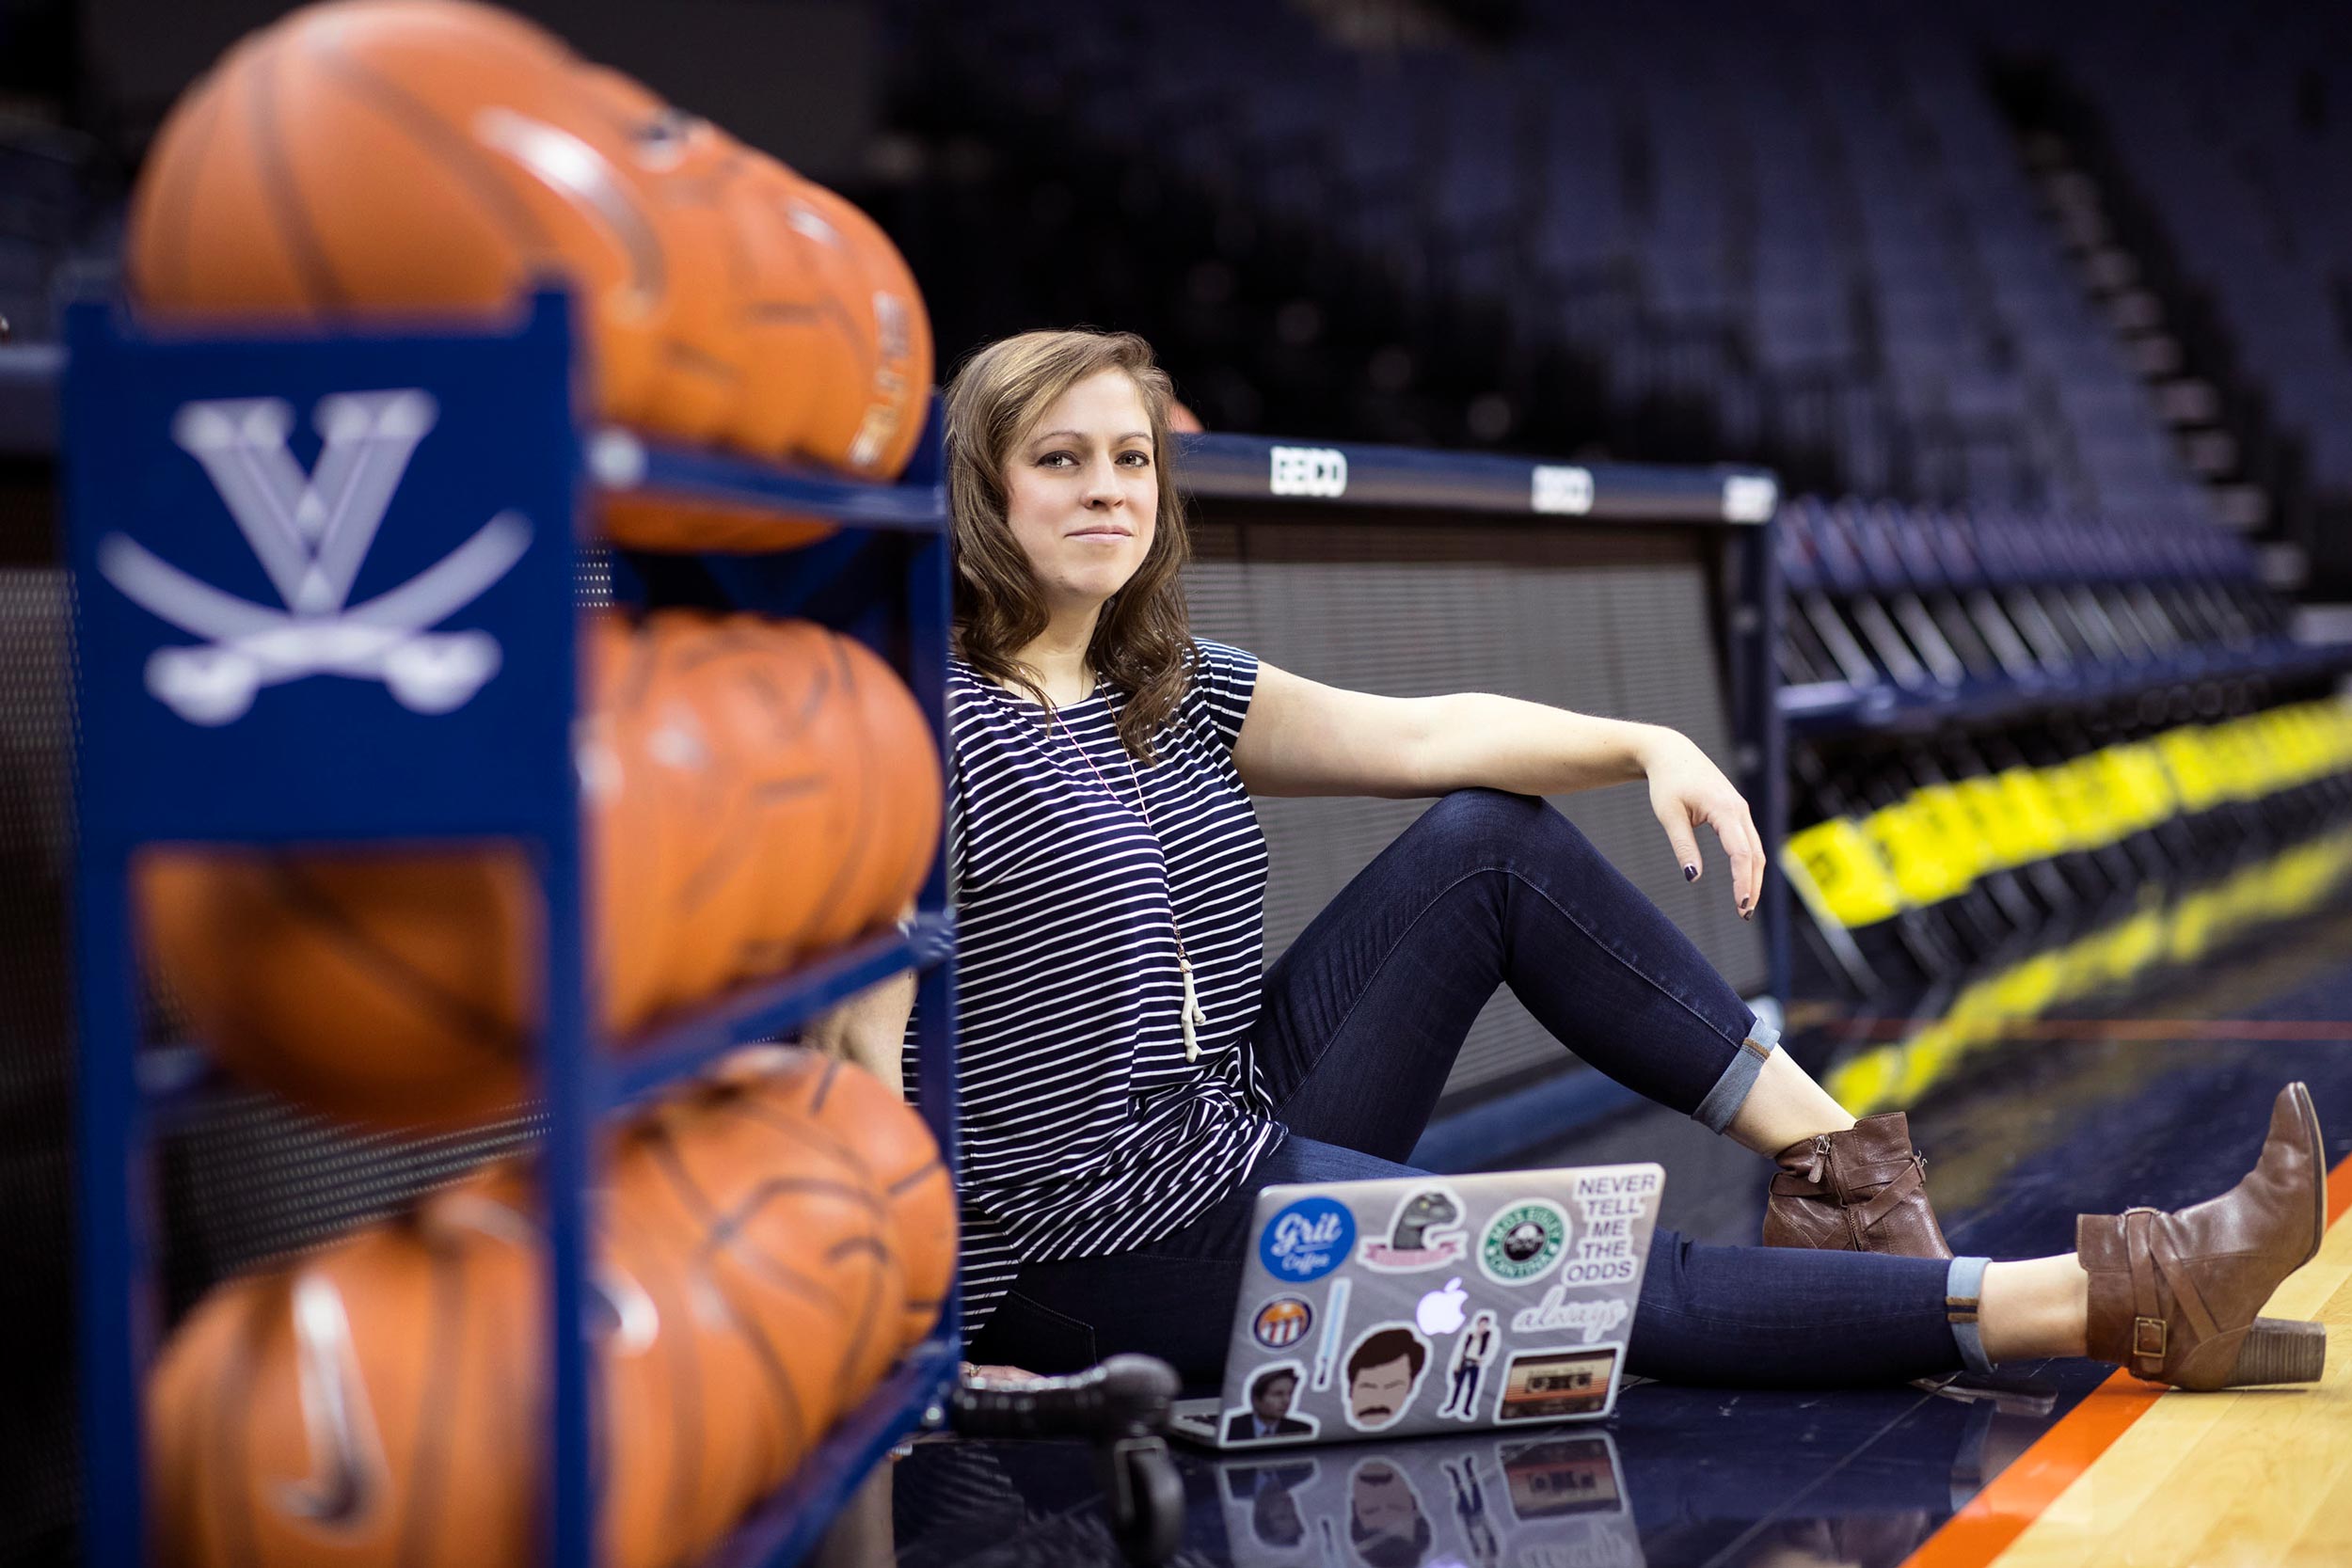 UVA athletics has always held a special place in Caroline Darney’s heart. (Photo by Dan Addison, University Communications)